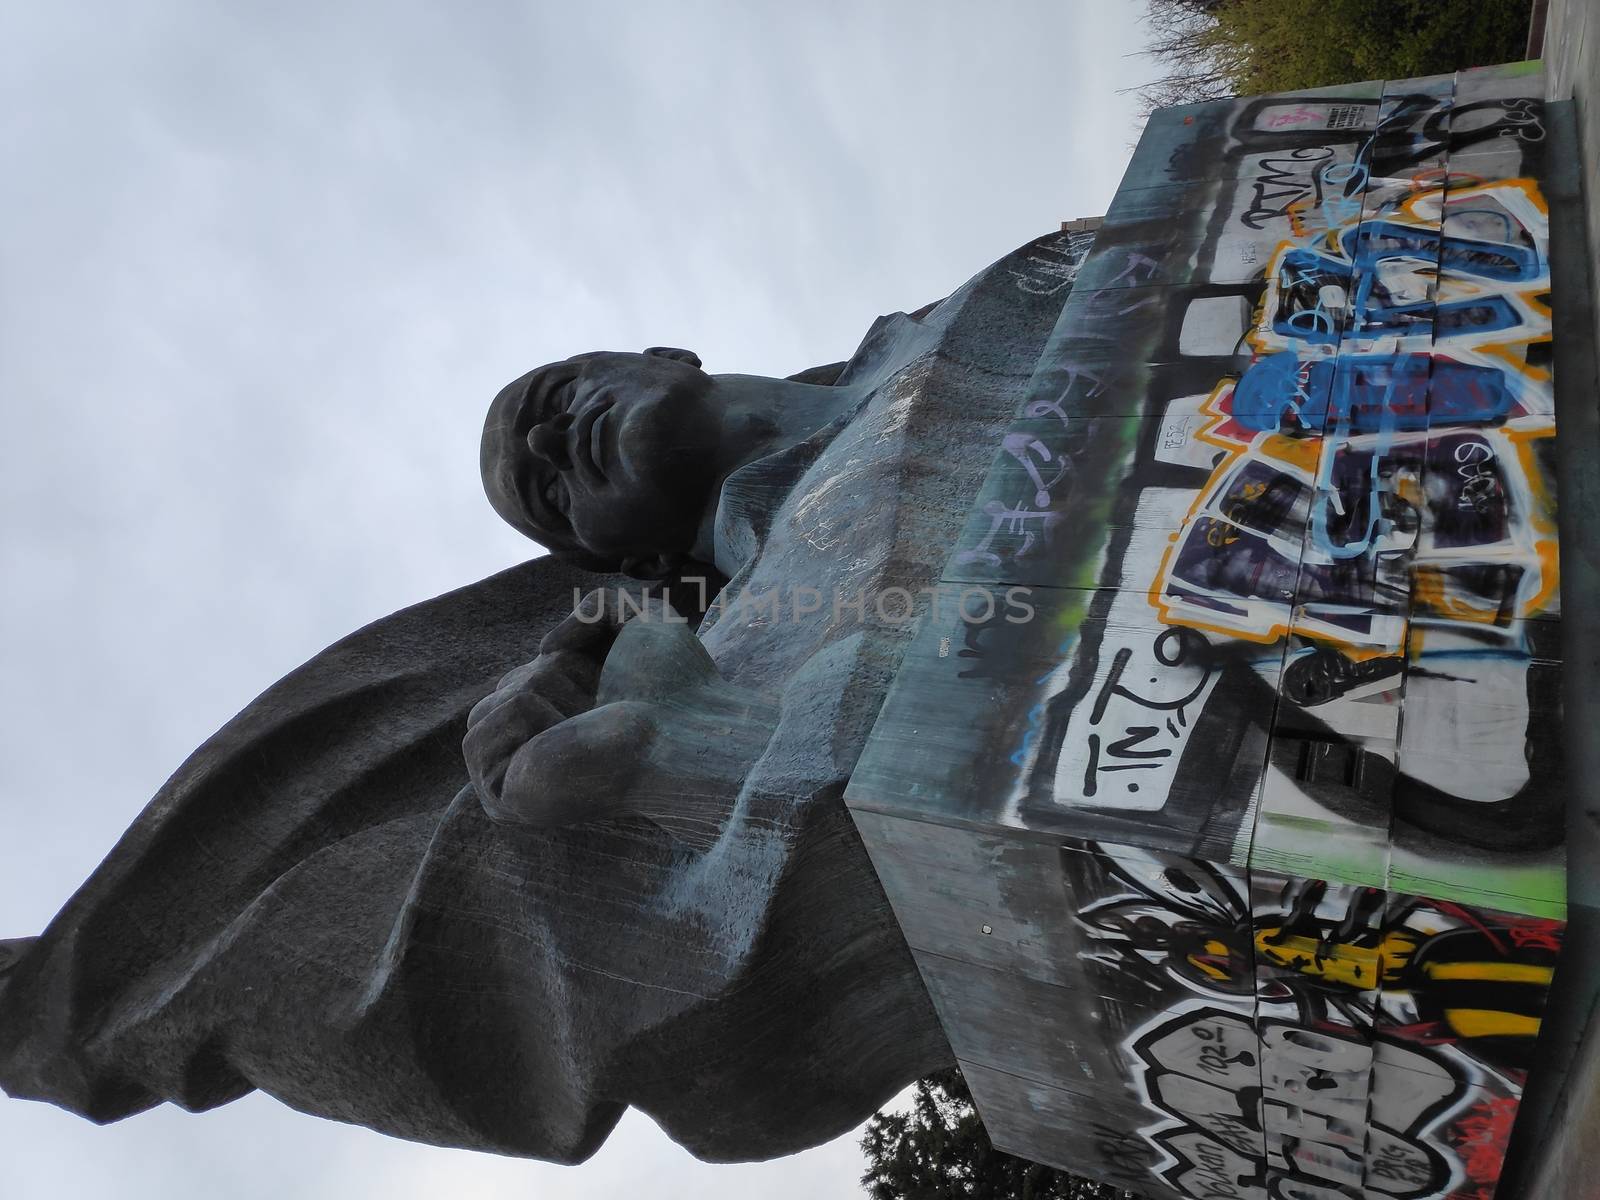 Monument with graffito in a park in Berlin by pisces2386